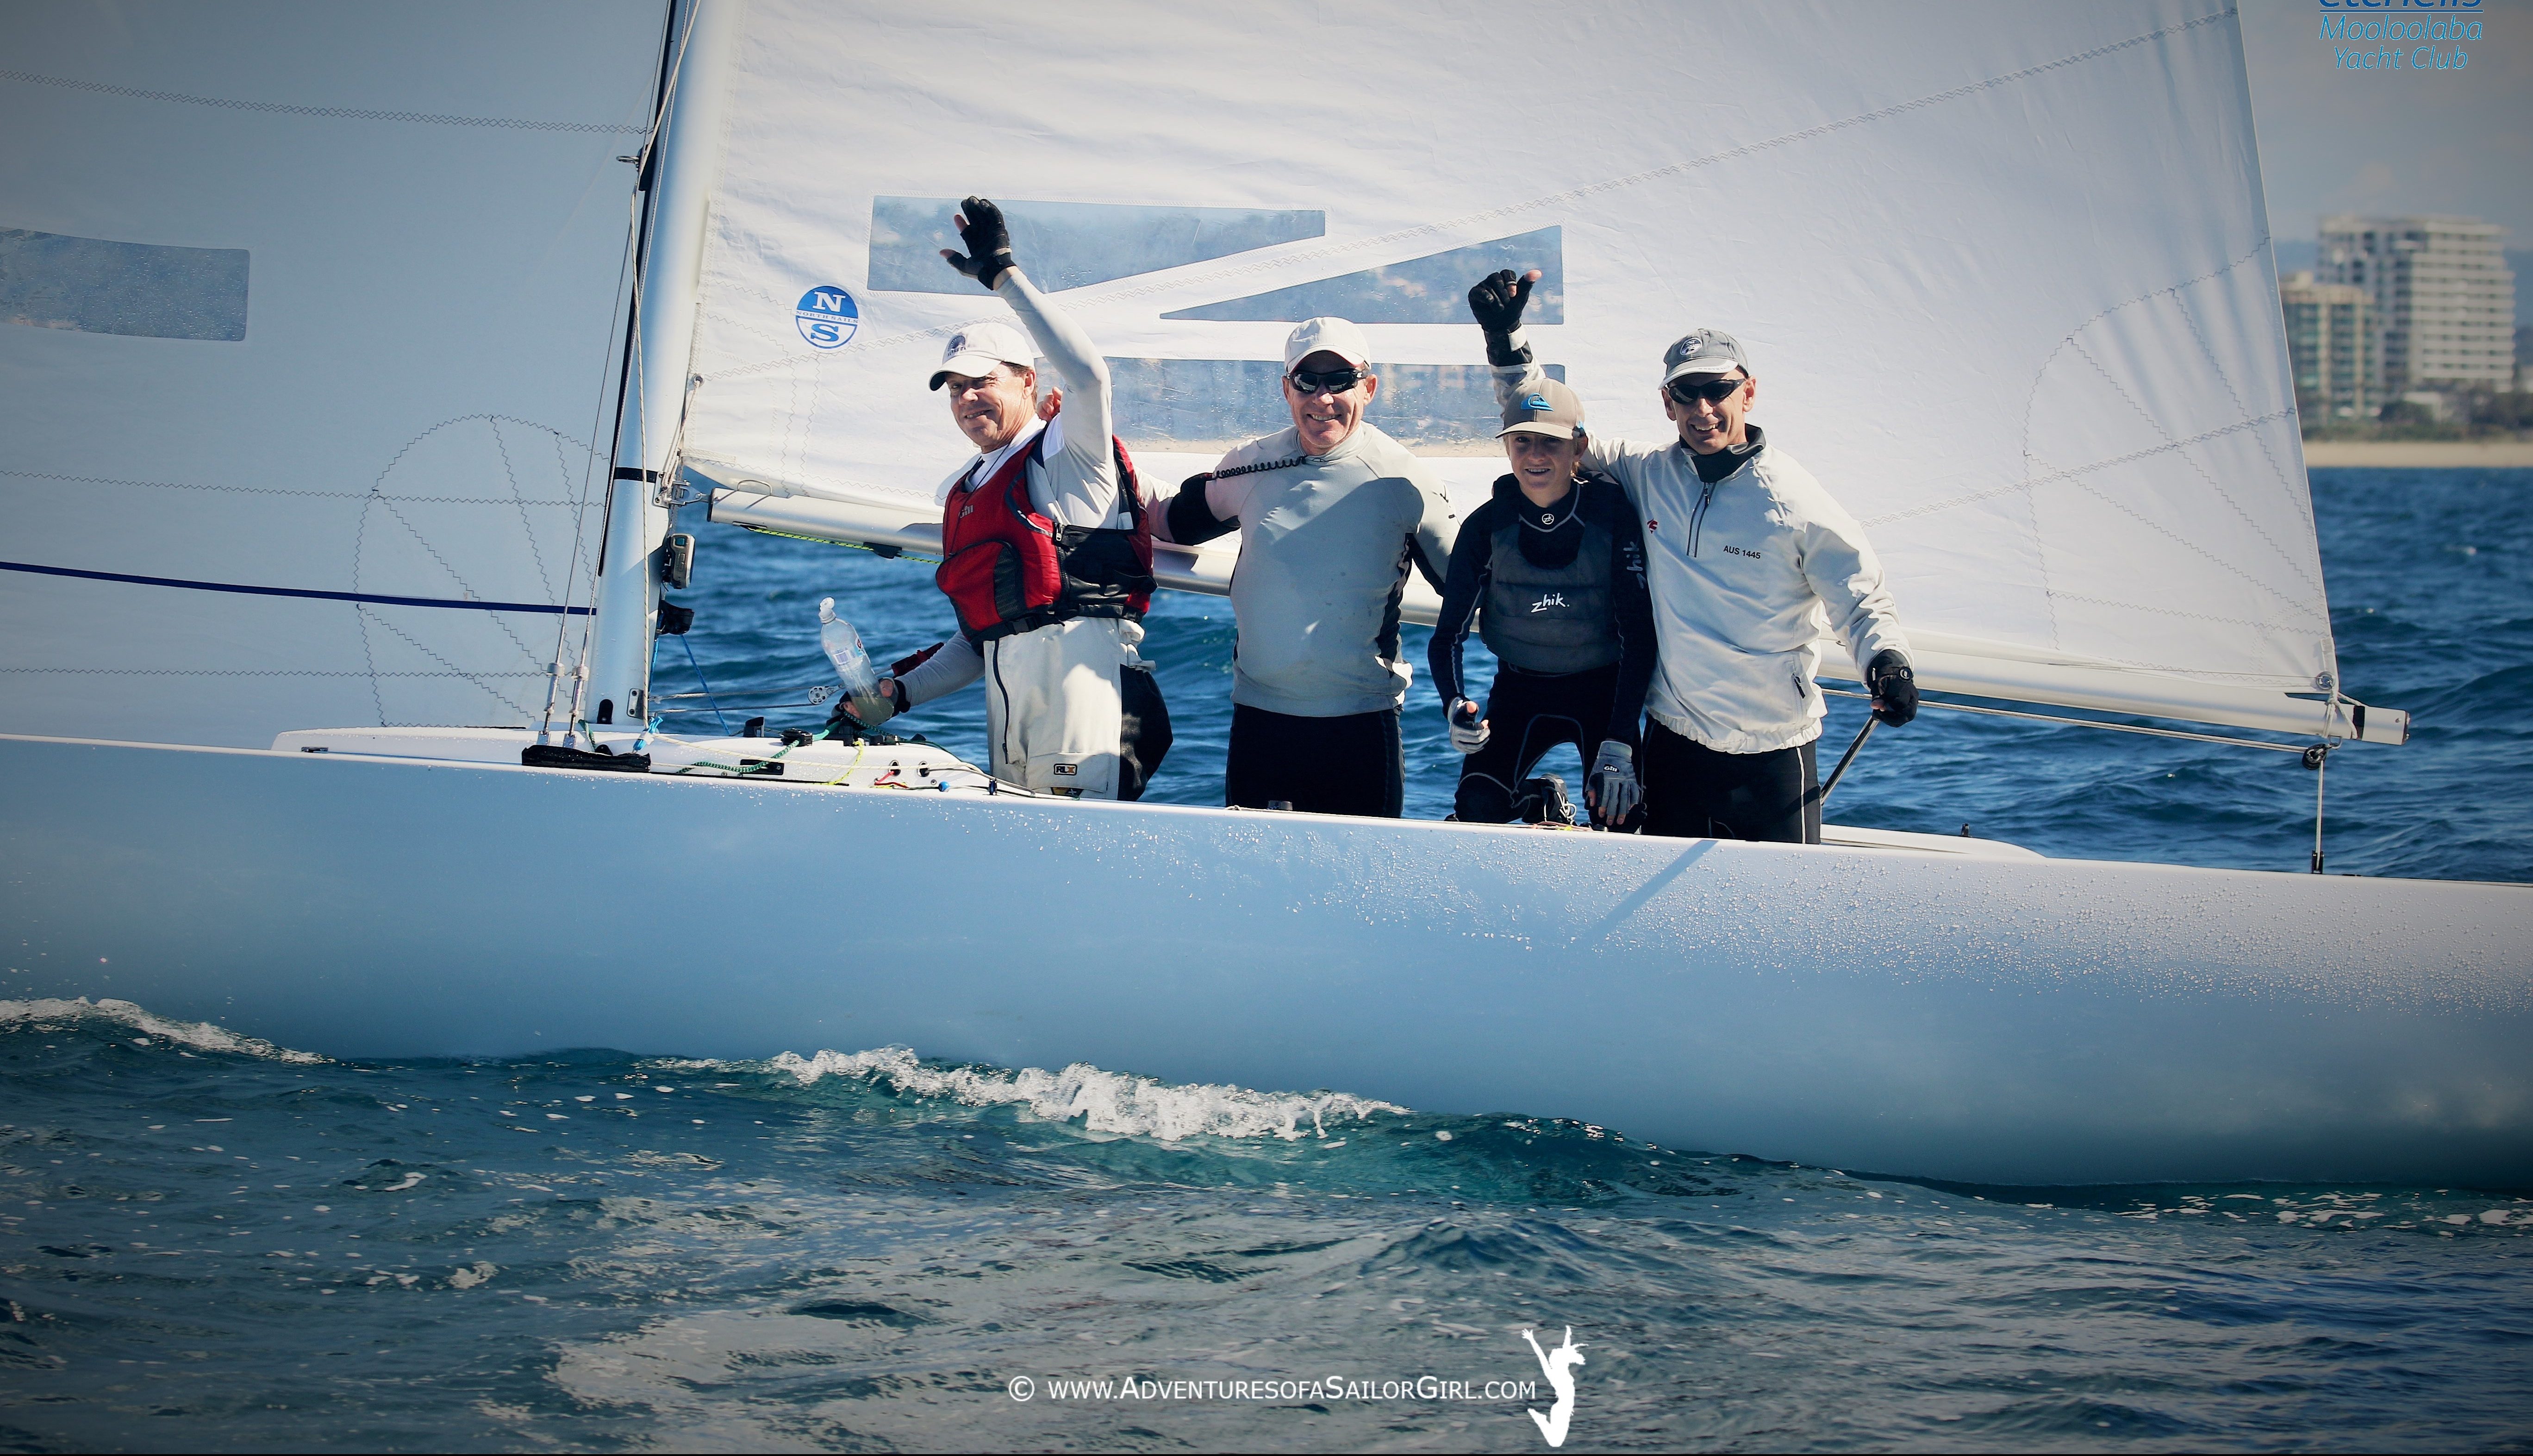 The Cure for Clark | The Dock Australasian Etchells Champions